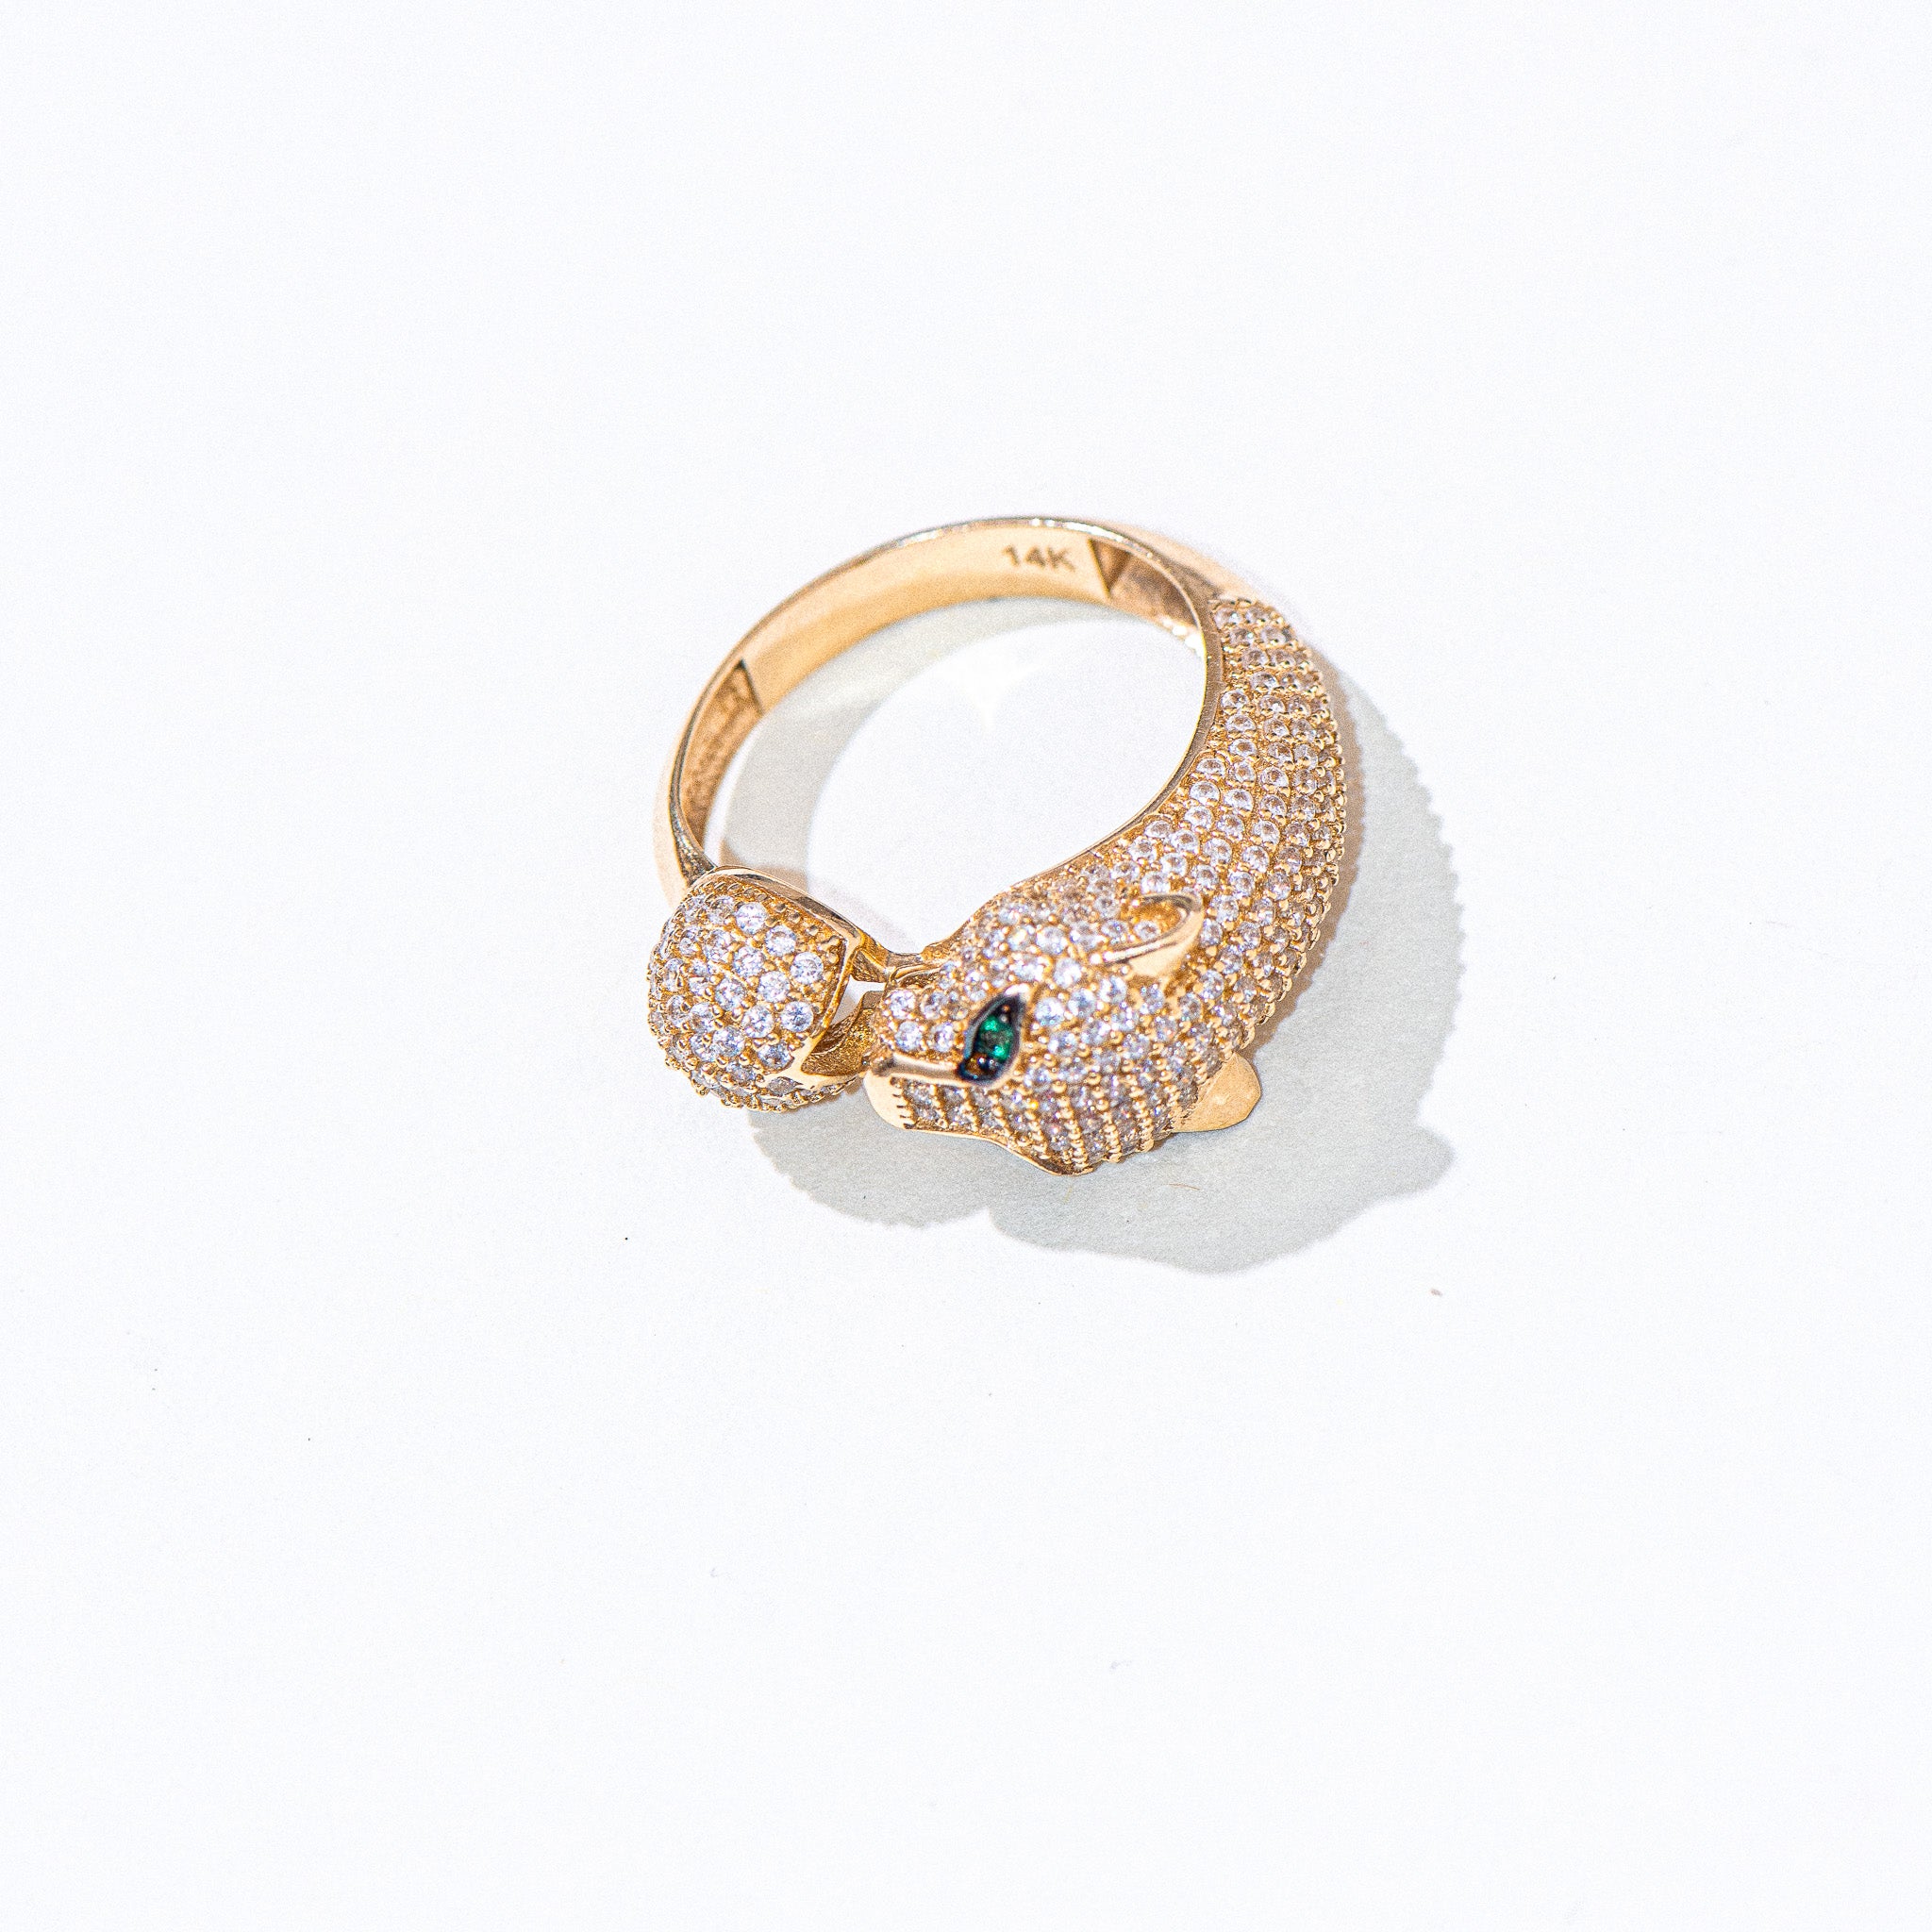 14K Yellow Gold Jaguar Ring with Emerald and CZ